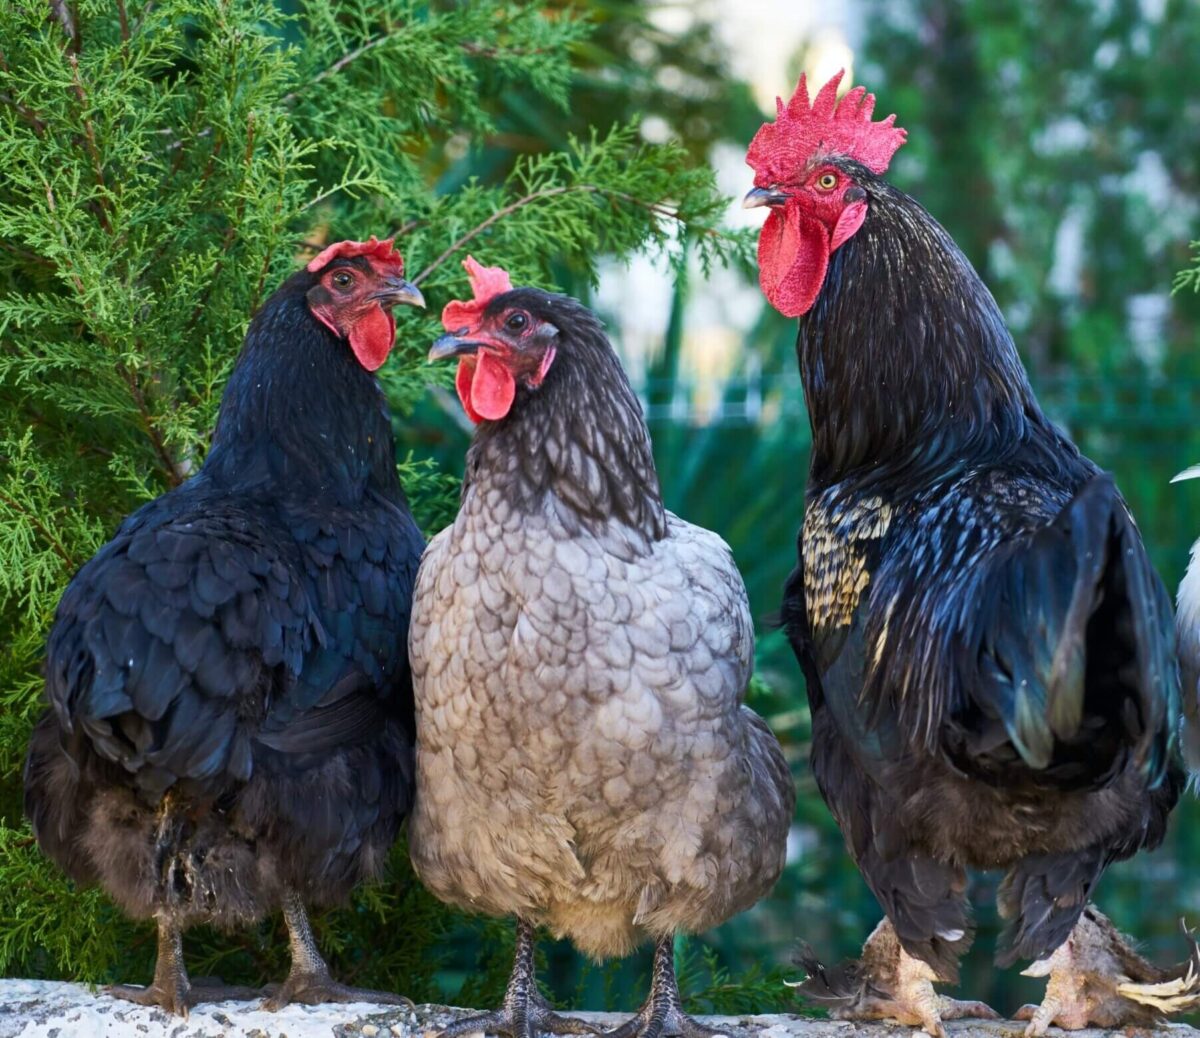 Photograph of chickens